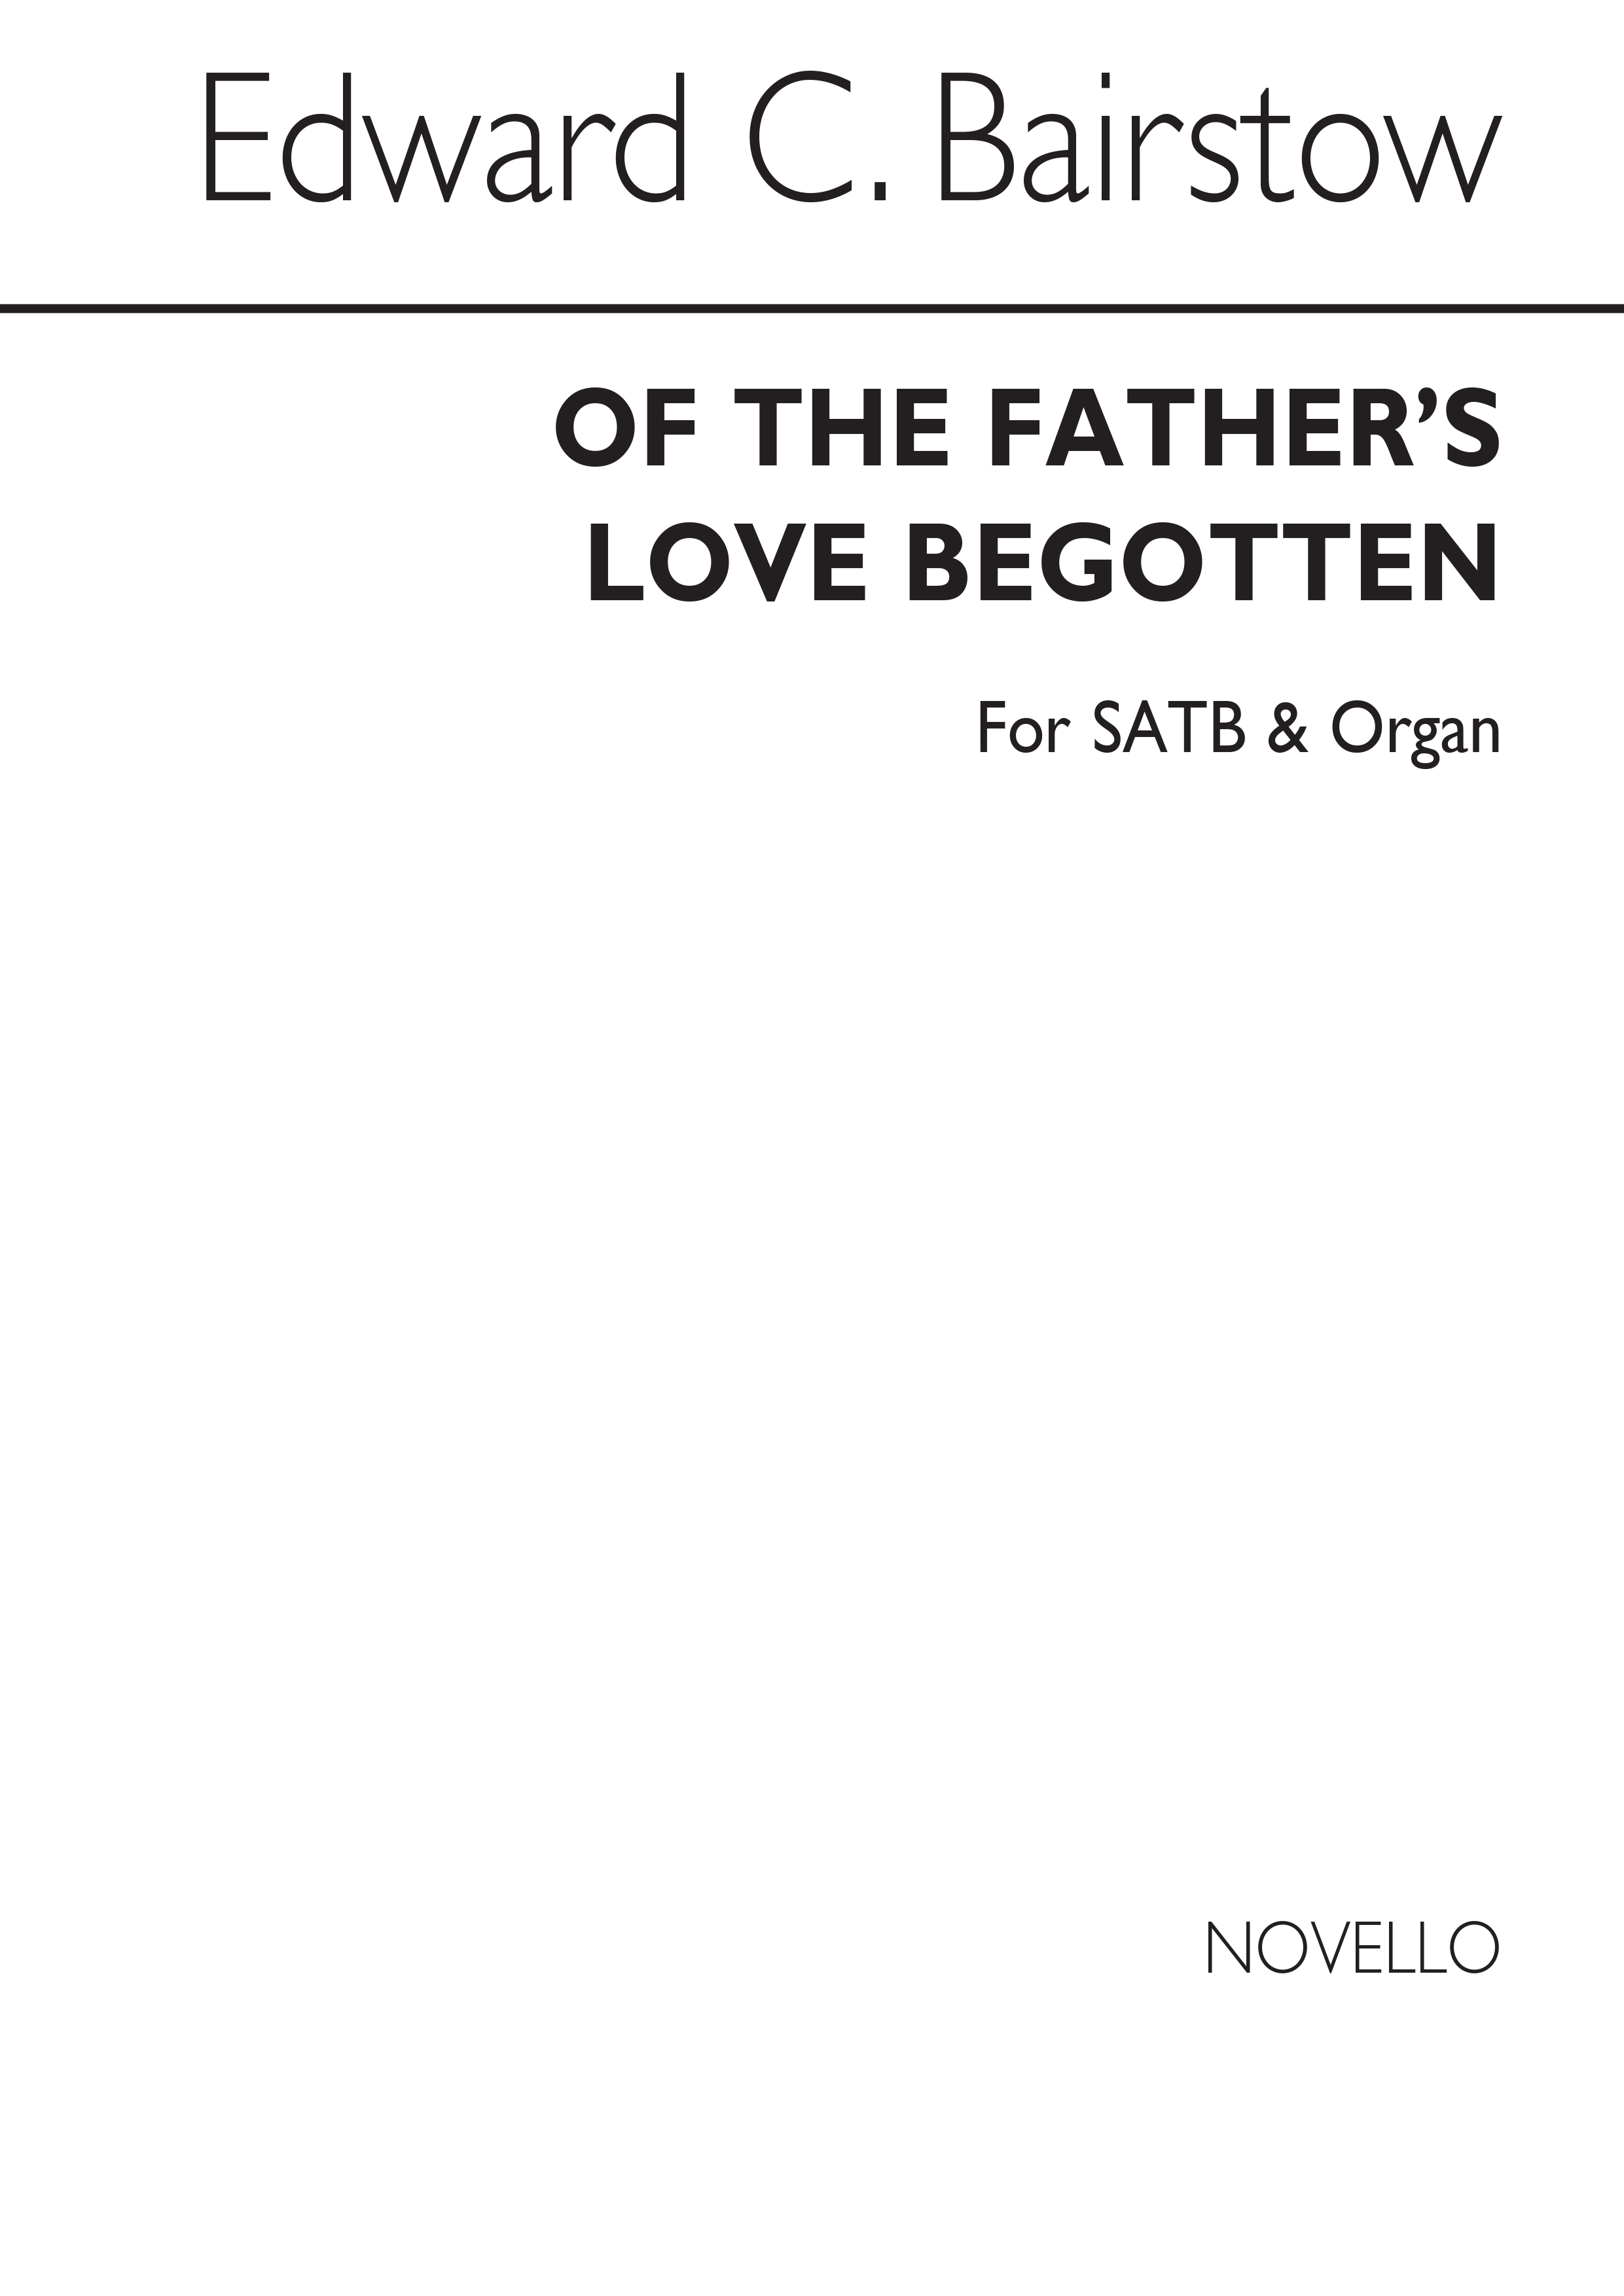 Bairstow: Of The Father's Love Begotten for SATB Chorus with Organ accompaniment